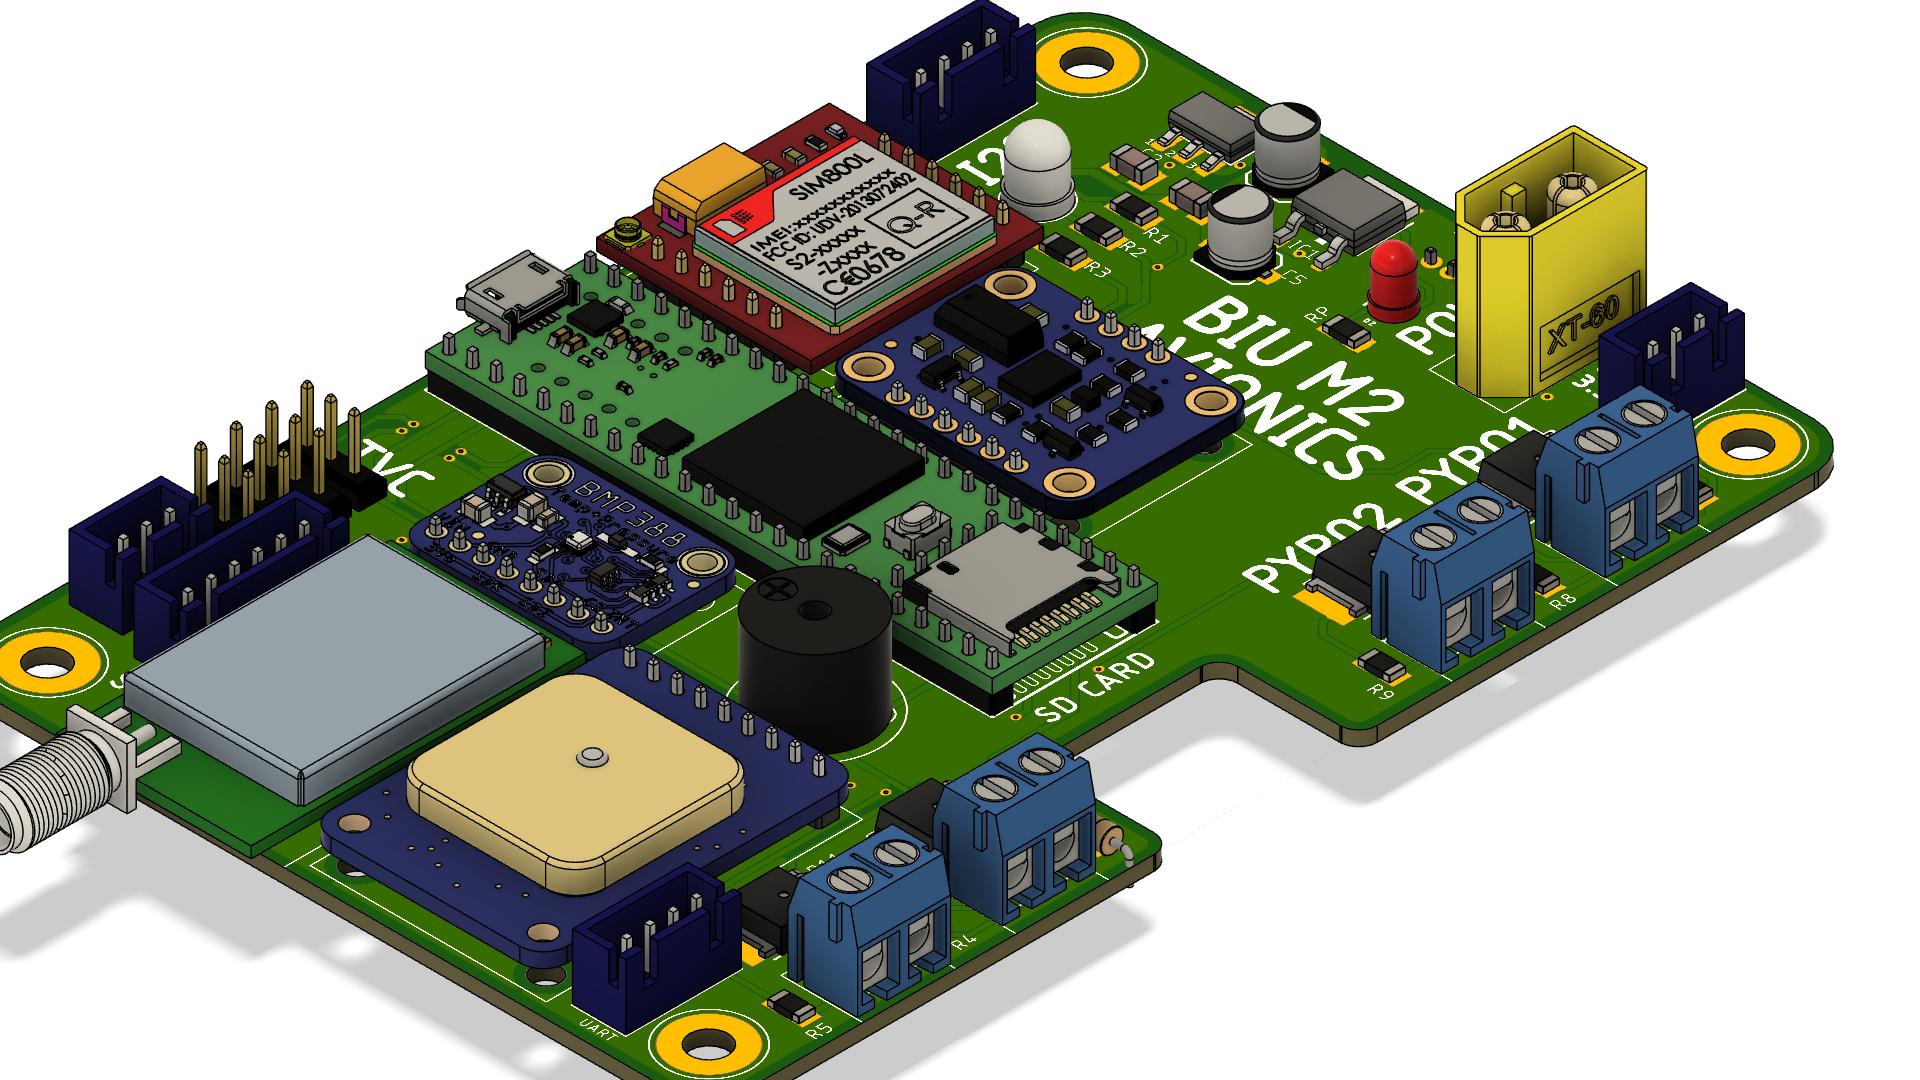 Design schematic, pcb layout and enclosure using autodesk eagle and  fusion360 by Ibnmusty